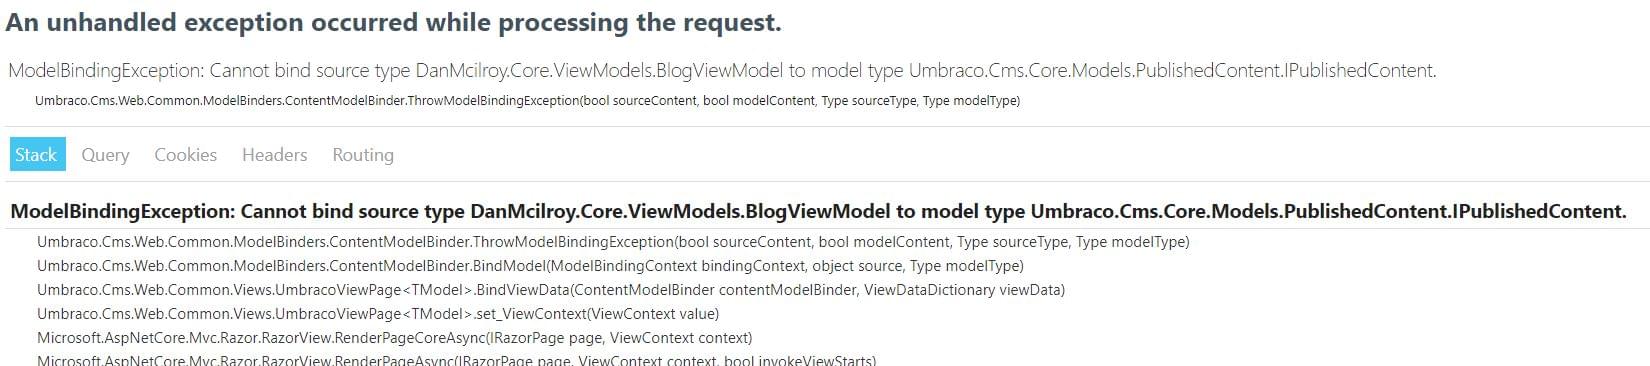 ModelBindingException: Cannot bind source type DanMcilroy.Core.ViewModels.BlogViewModel to model type Umbraco.Cms.Core.Models.PublishedContent.IPublishedContent